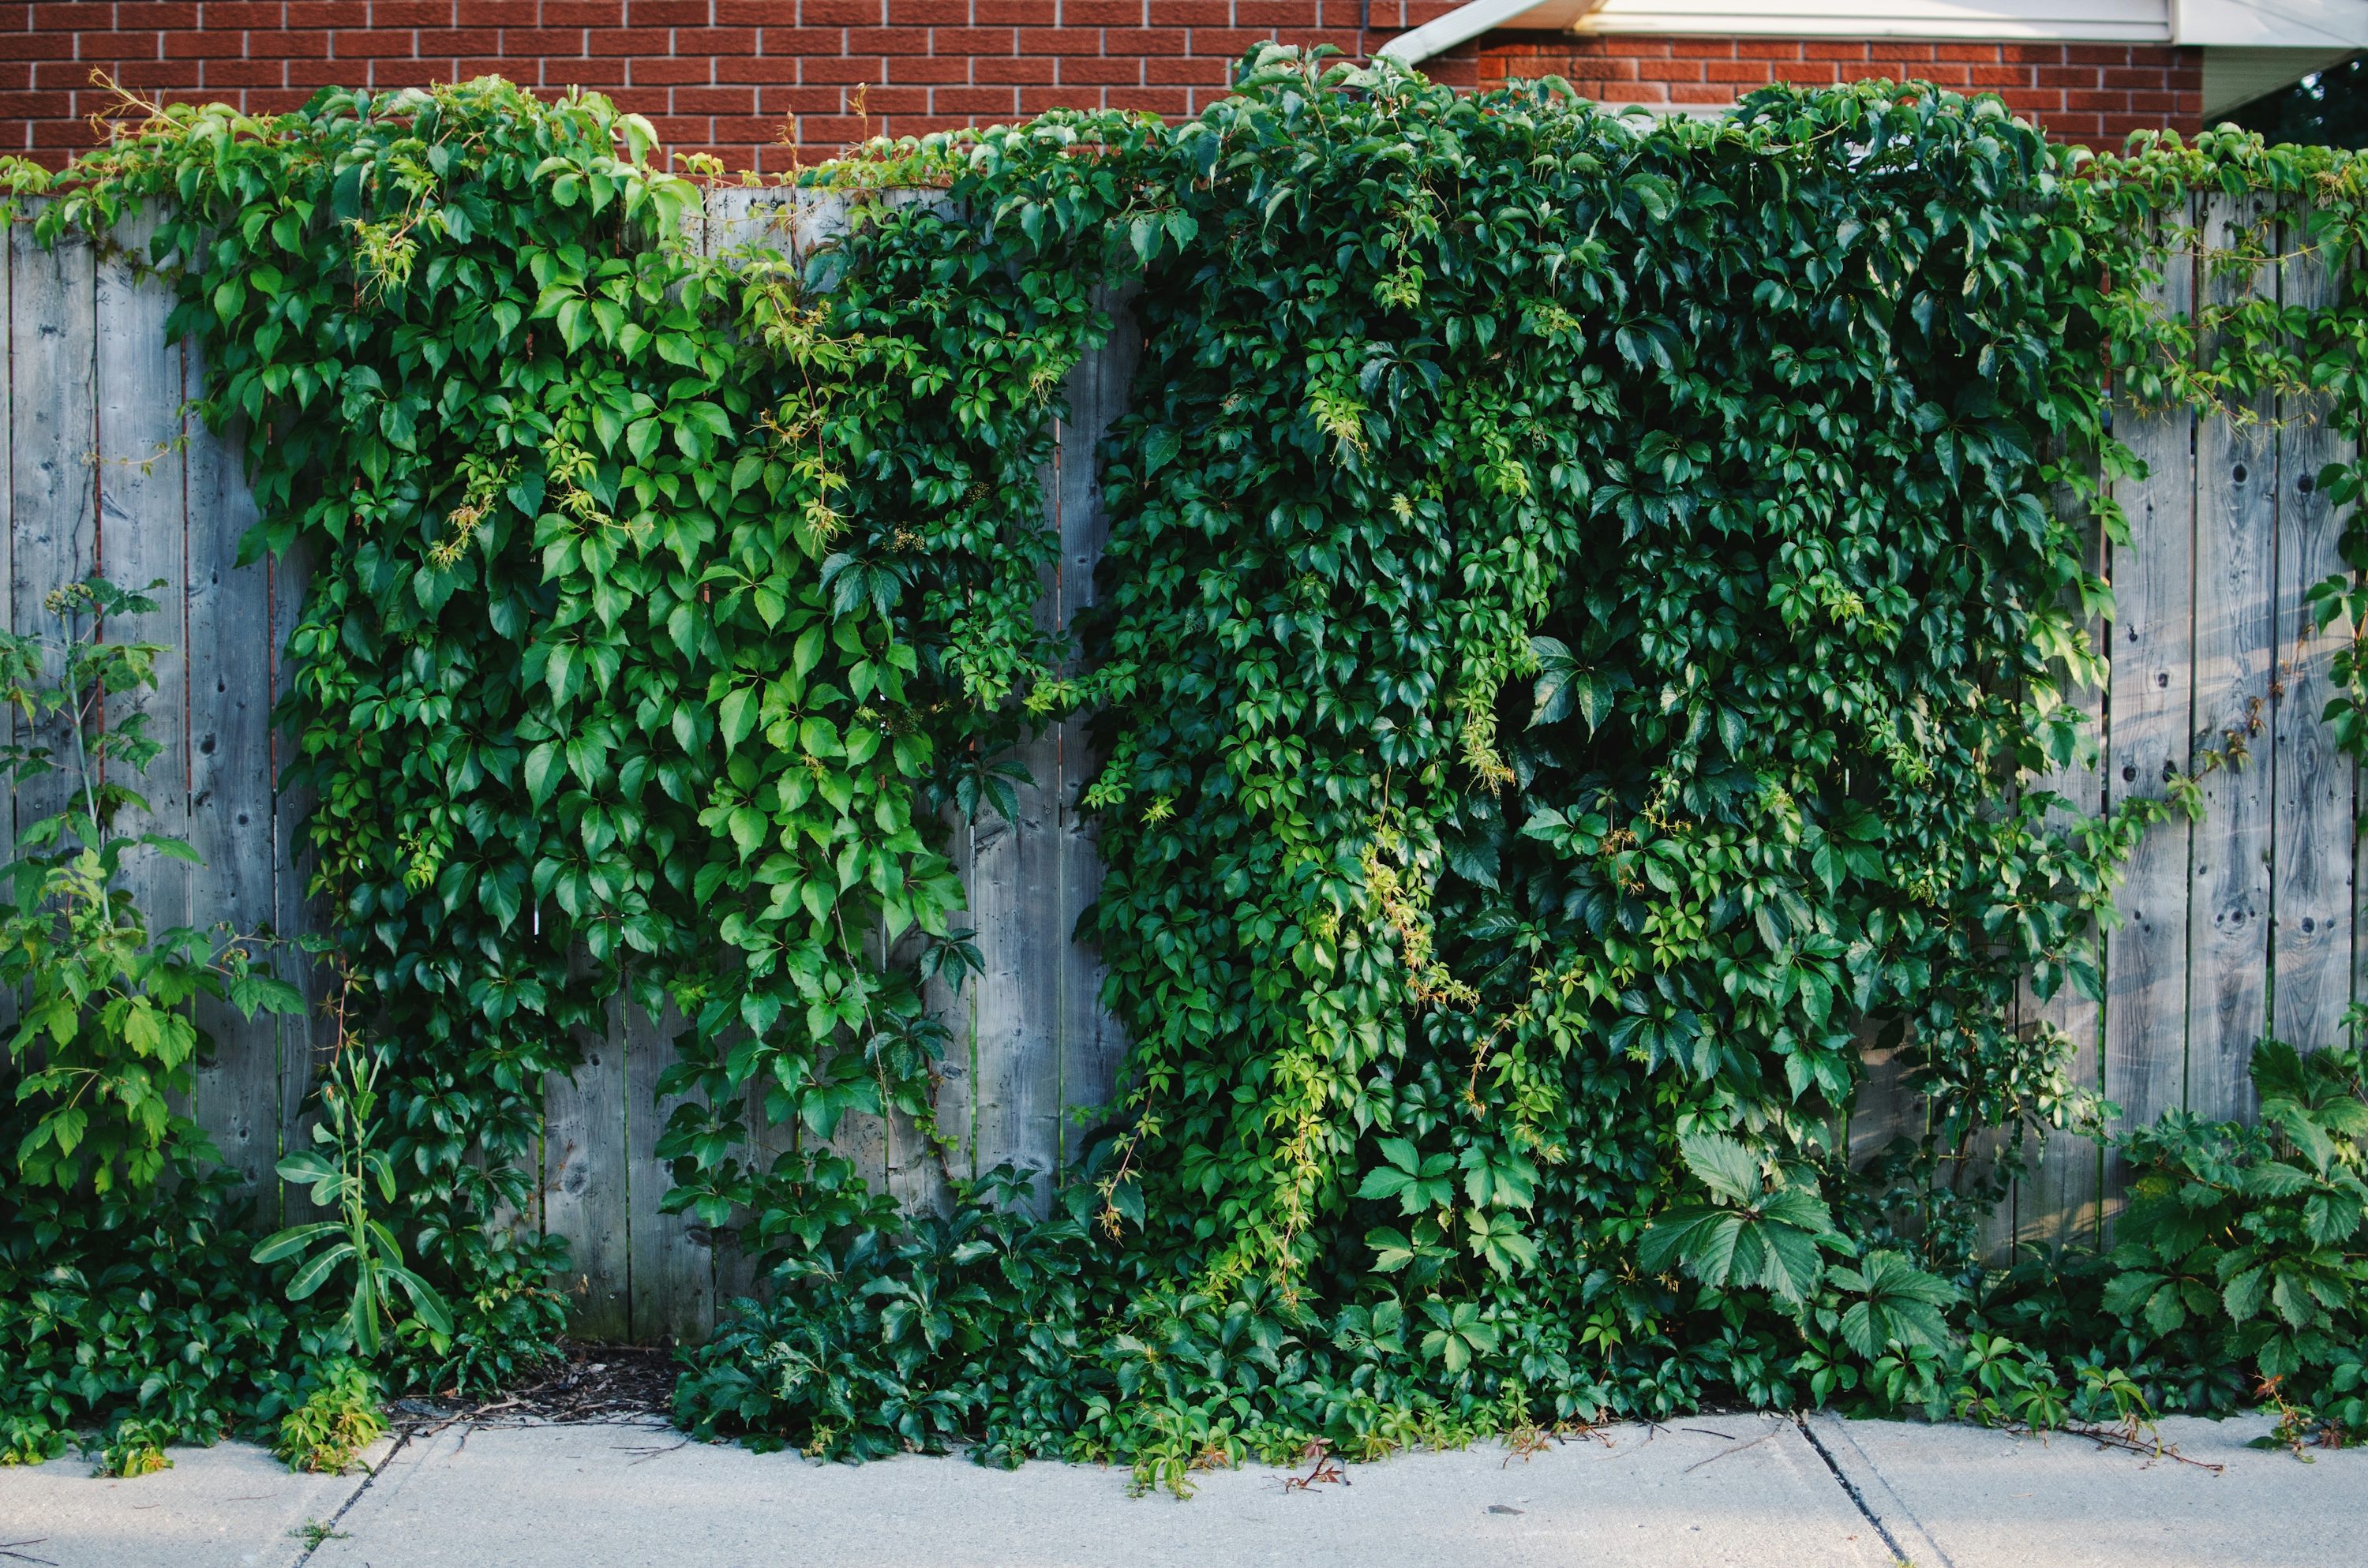 a fence covered in vines next to a brick building